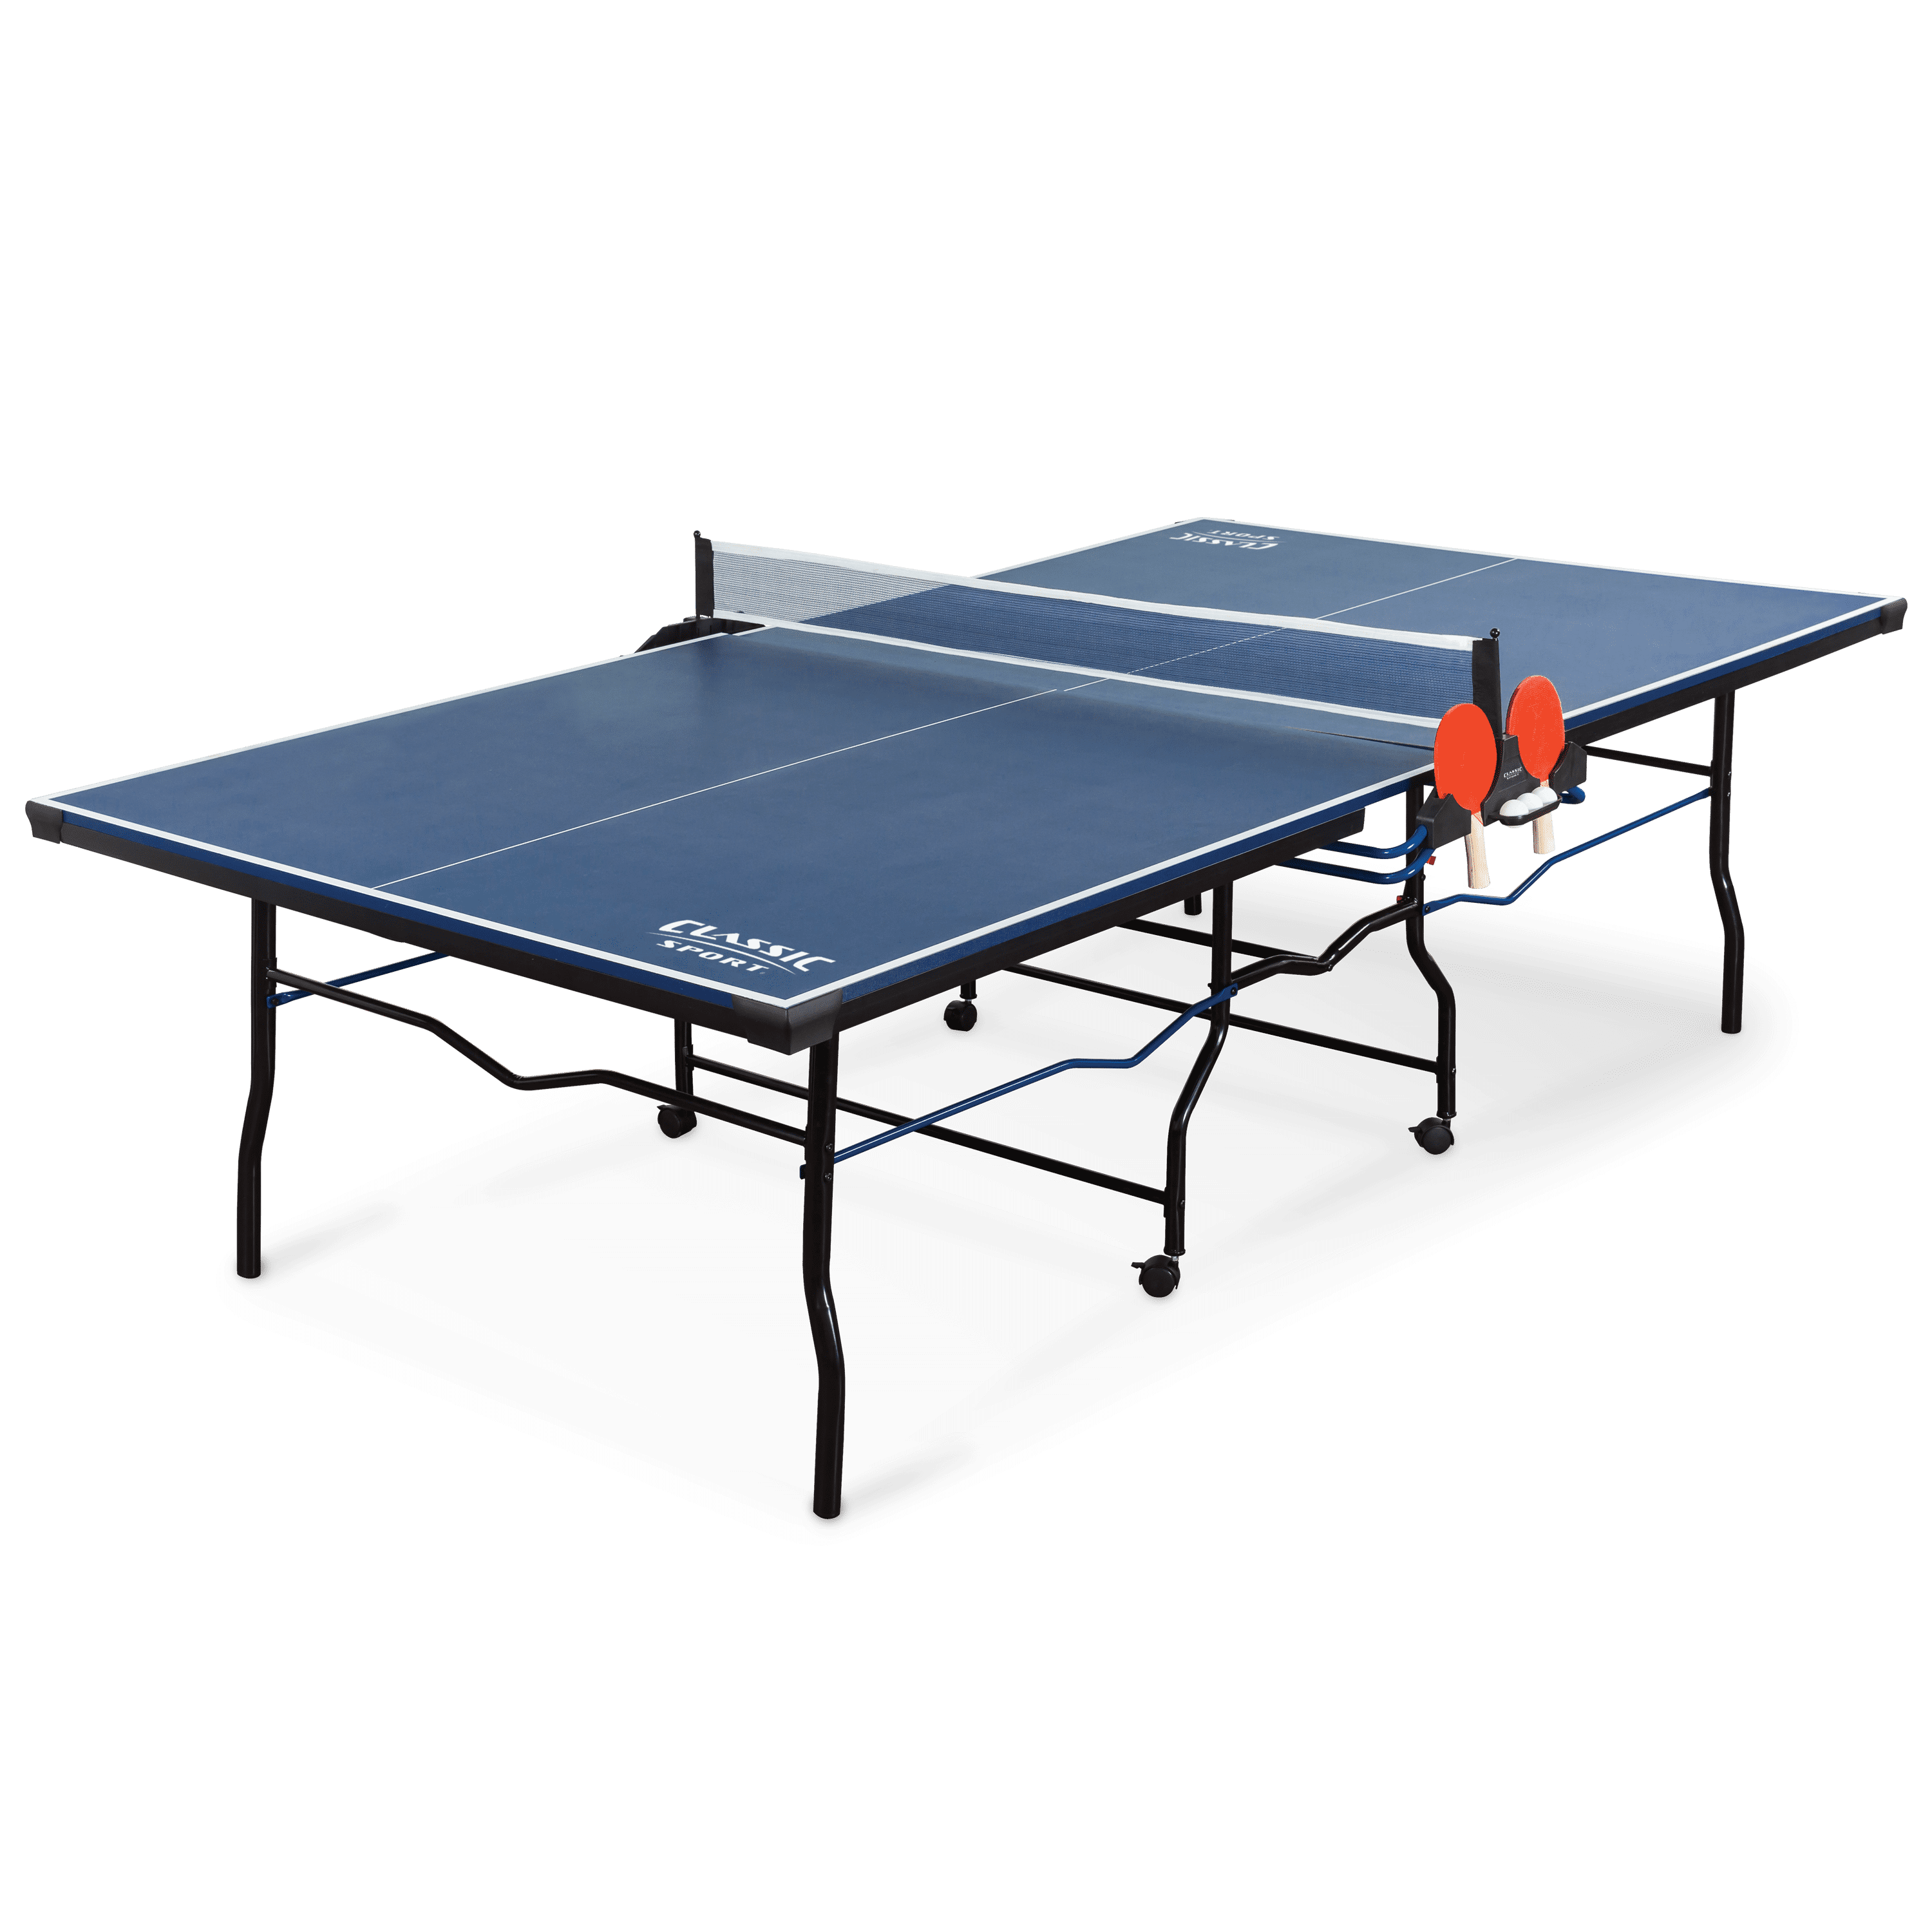 About Table Tennis (Ping Pong)